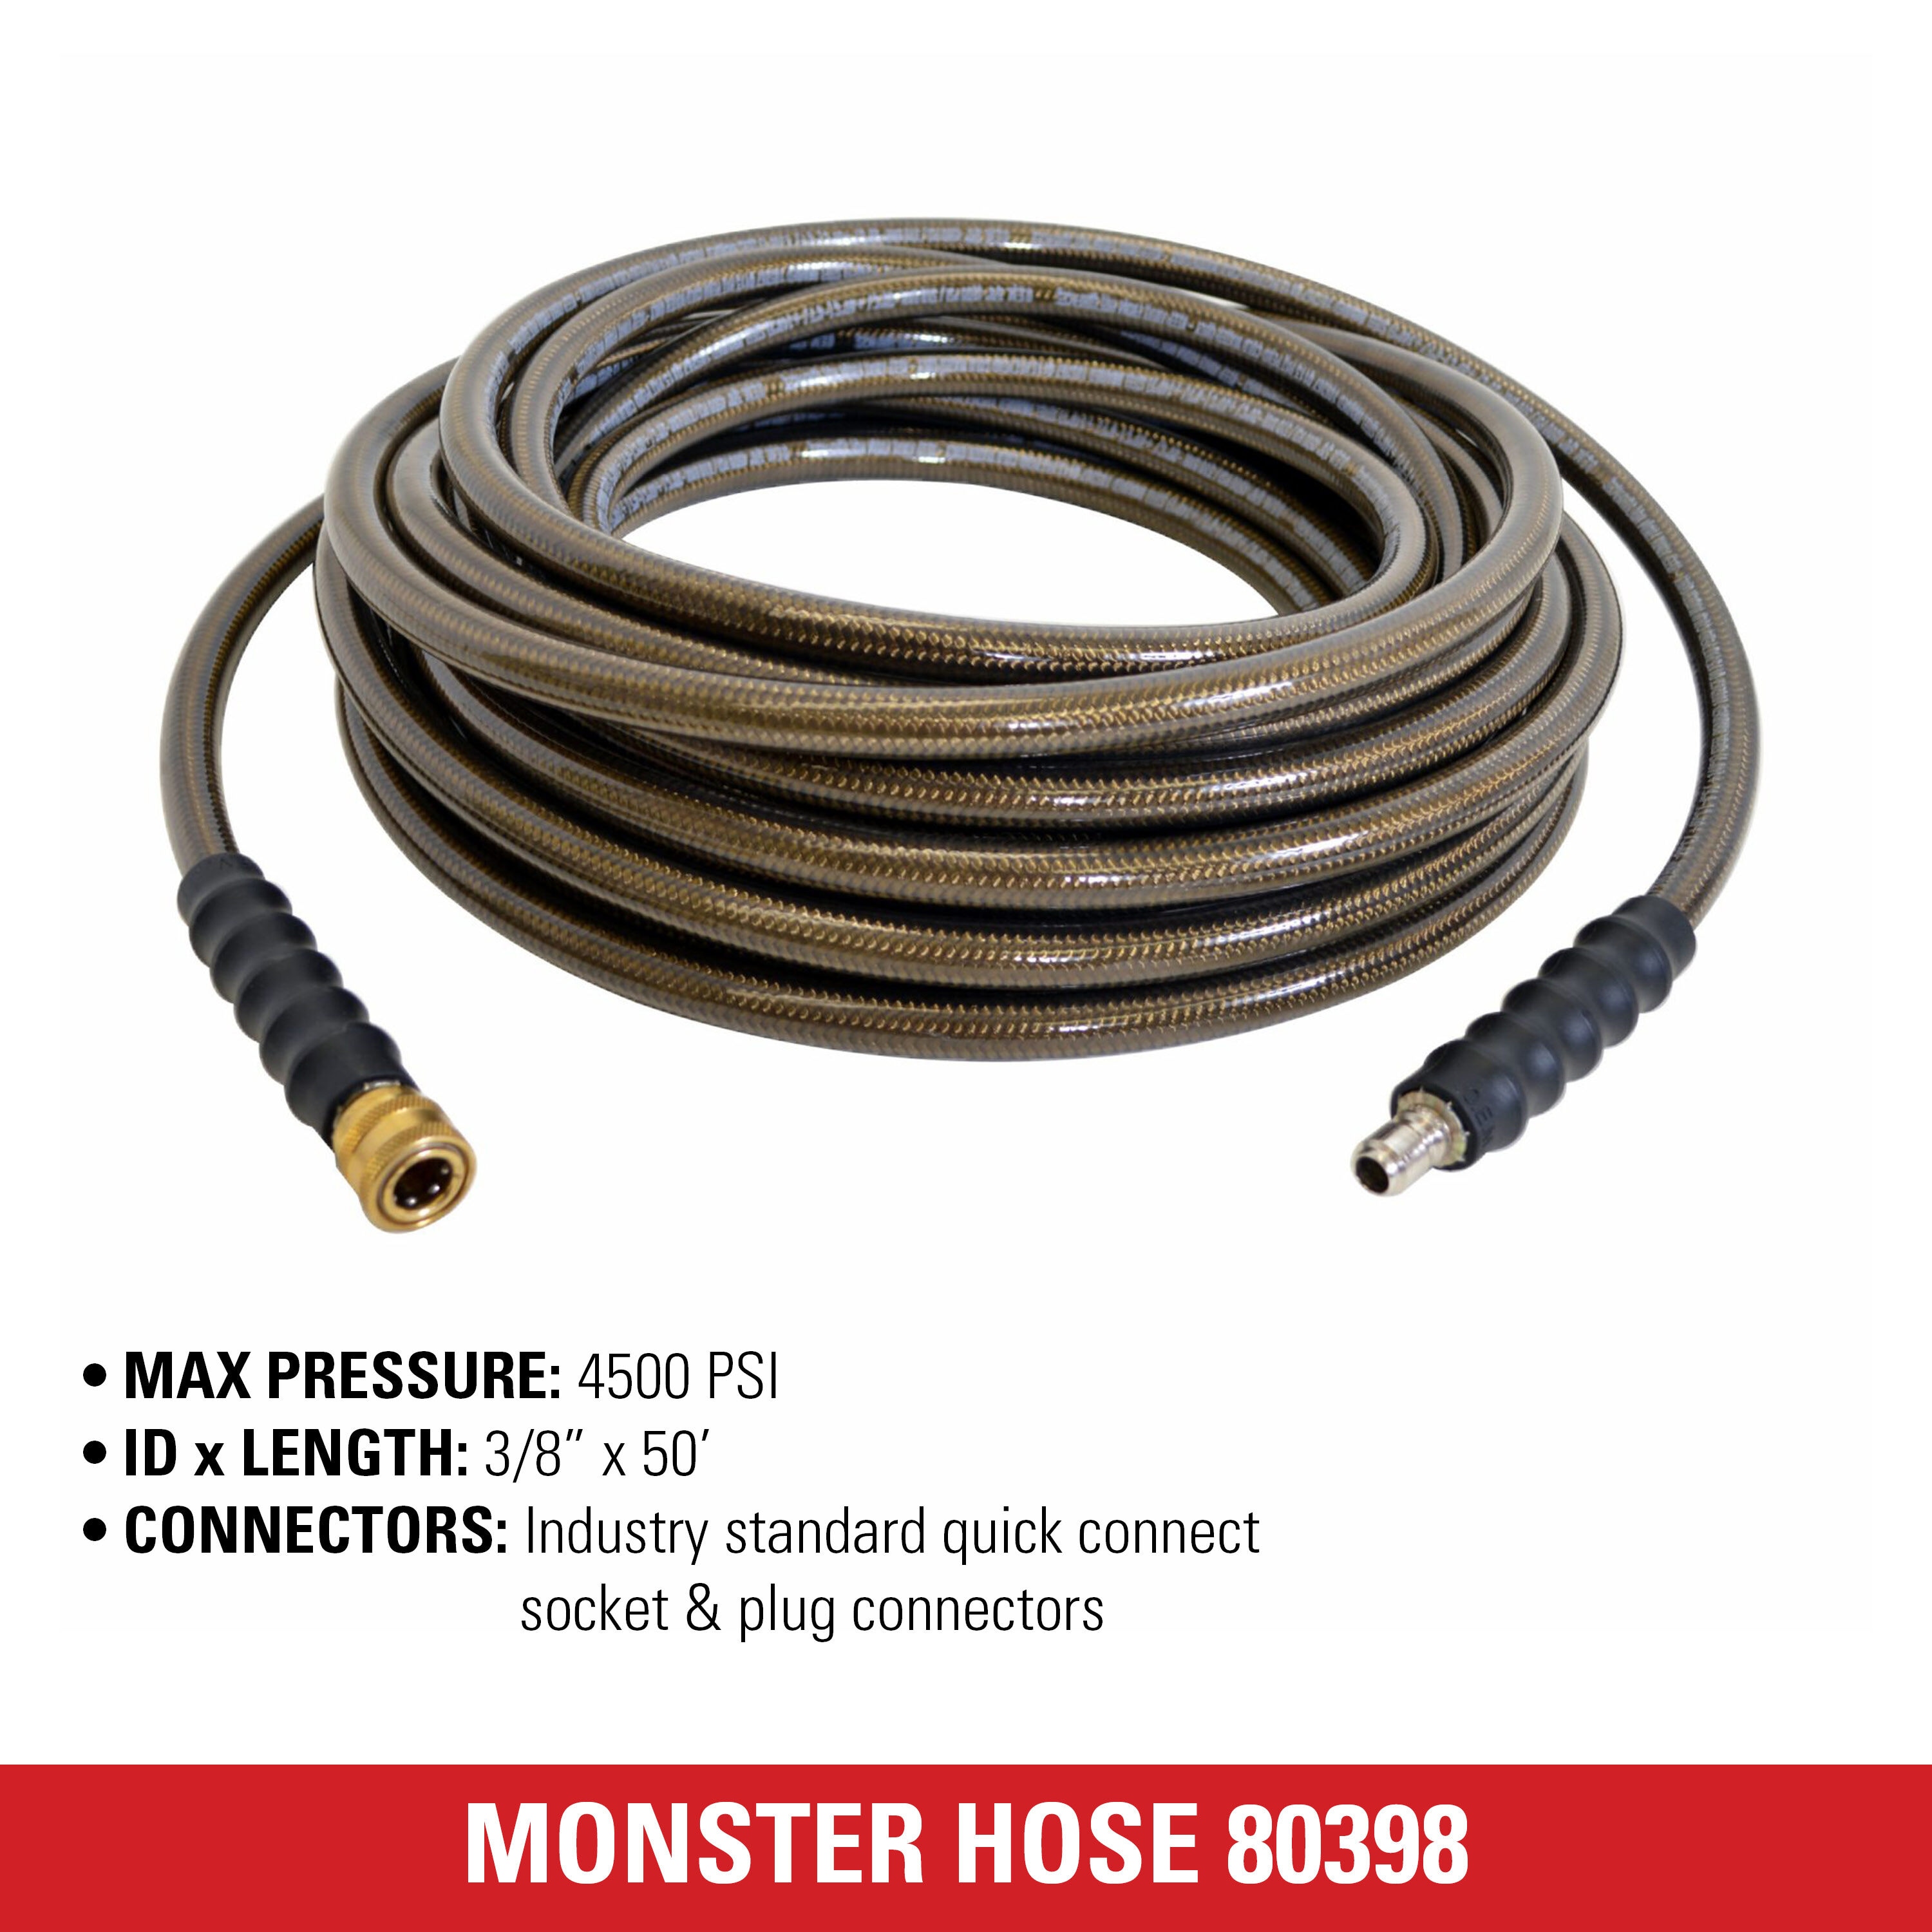 Non-Marking Pressure Washer Hose 3/8 in x 25 ft 